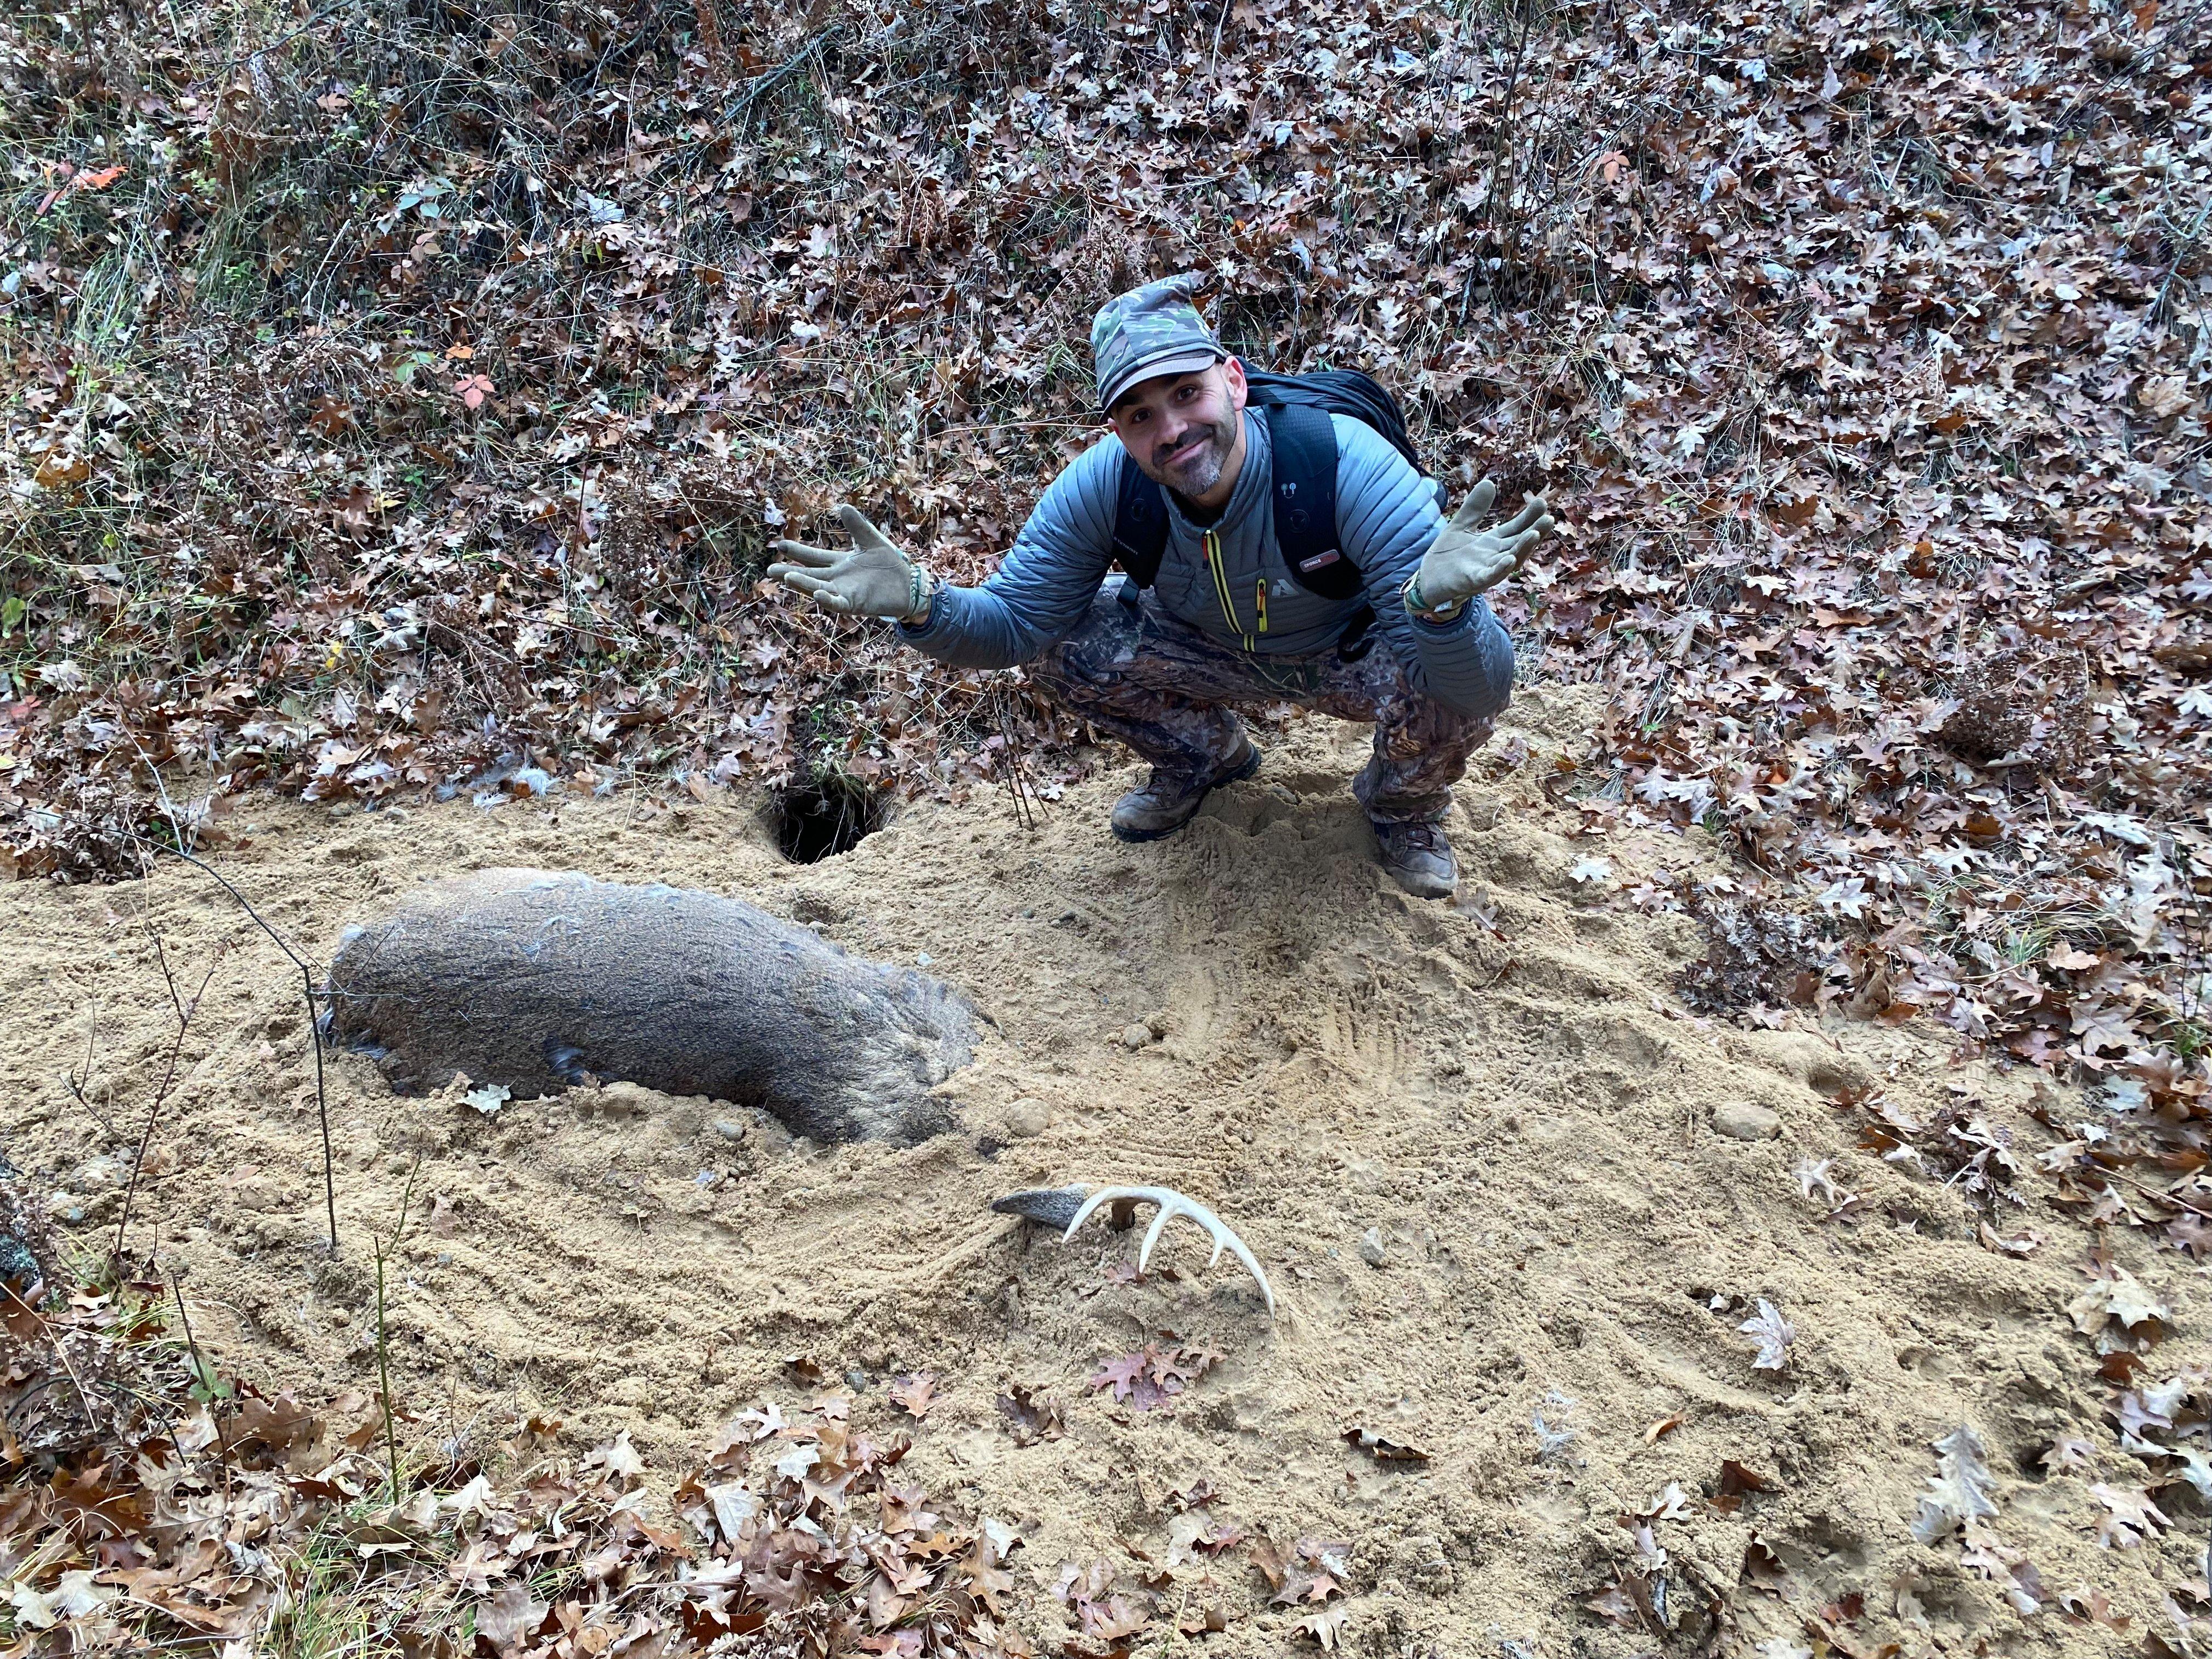 Steve Karapetian discovered his deer partially buried in sand and an angry badger guarding it. Image provided by Steve Karapetian